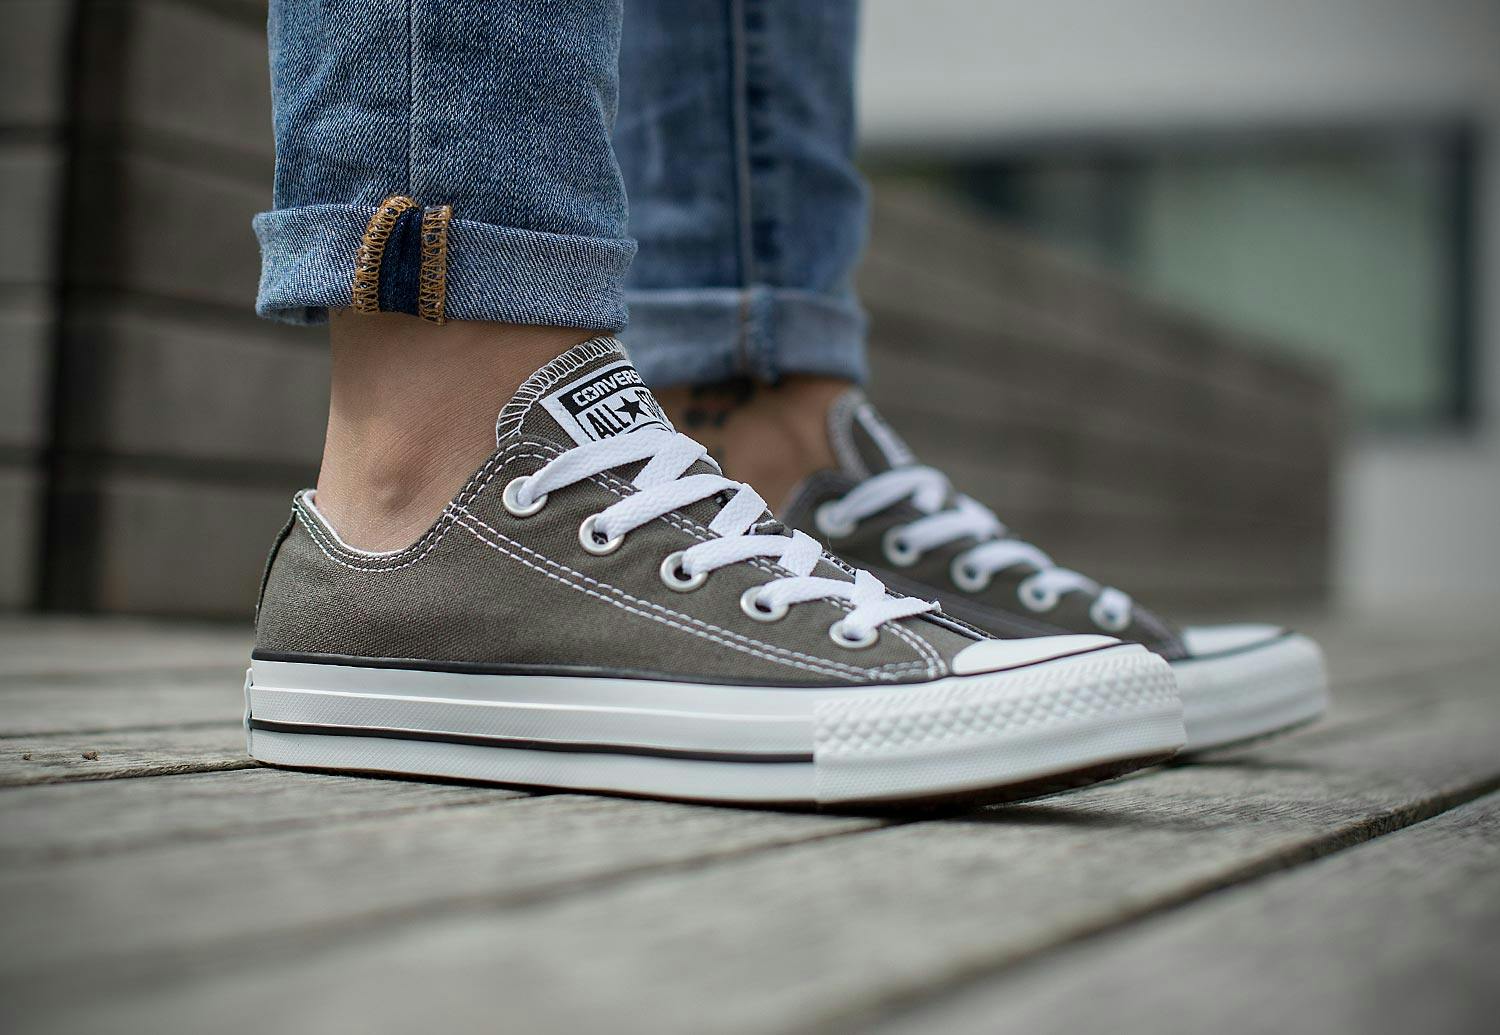 $25 Converse Low and High Top Shoes + Free Shipping! - The Krazy Coupon Lady